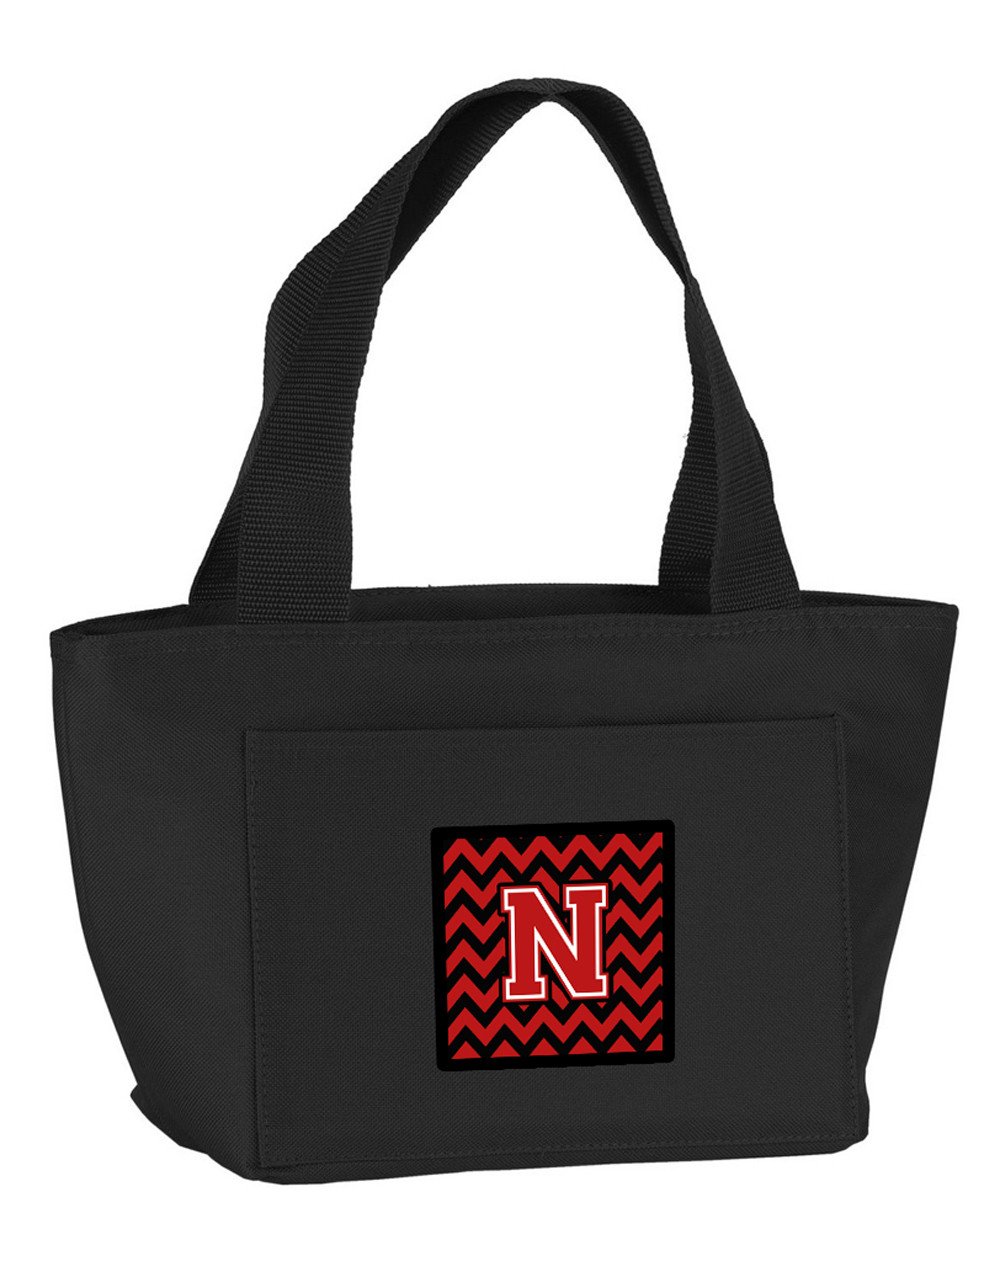 Letter N Chevron Black and Red   Lunch Bag CJ1047-NBK-8808 by Caroline's Treasures